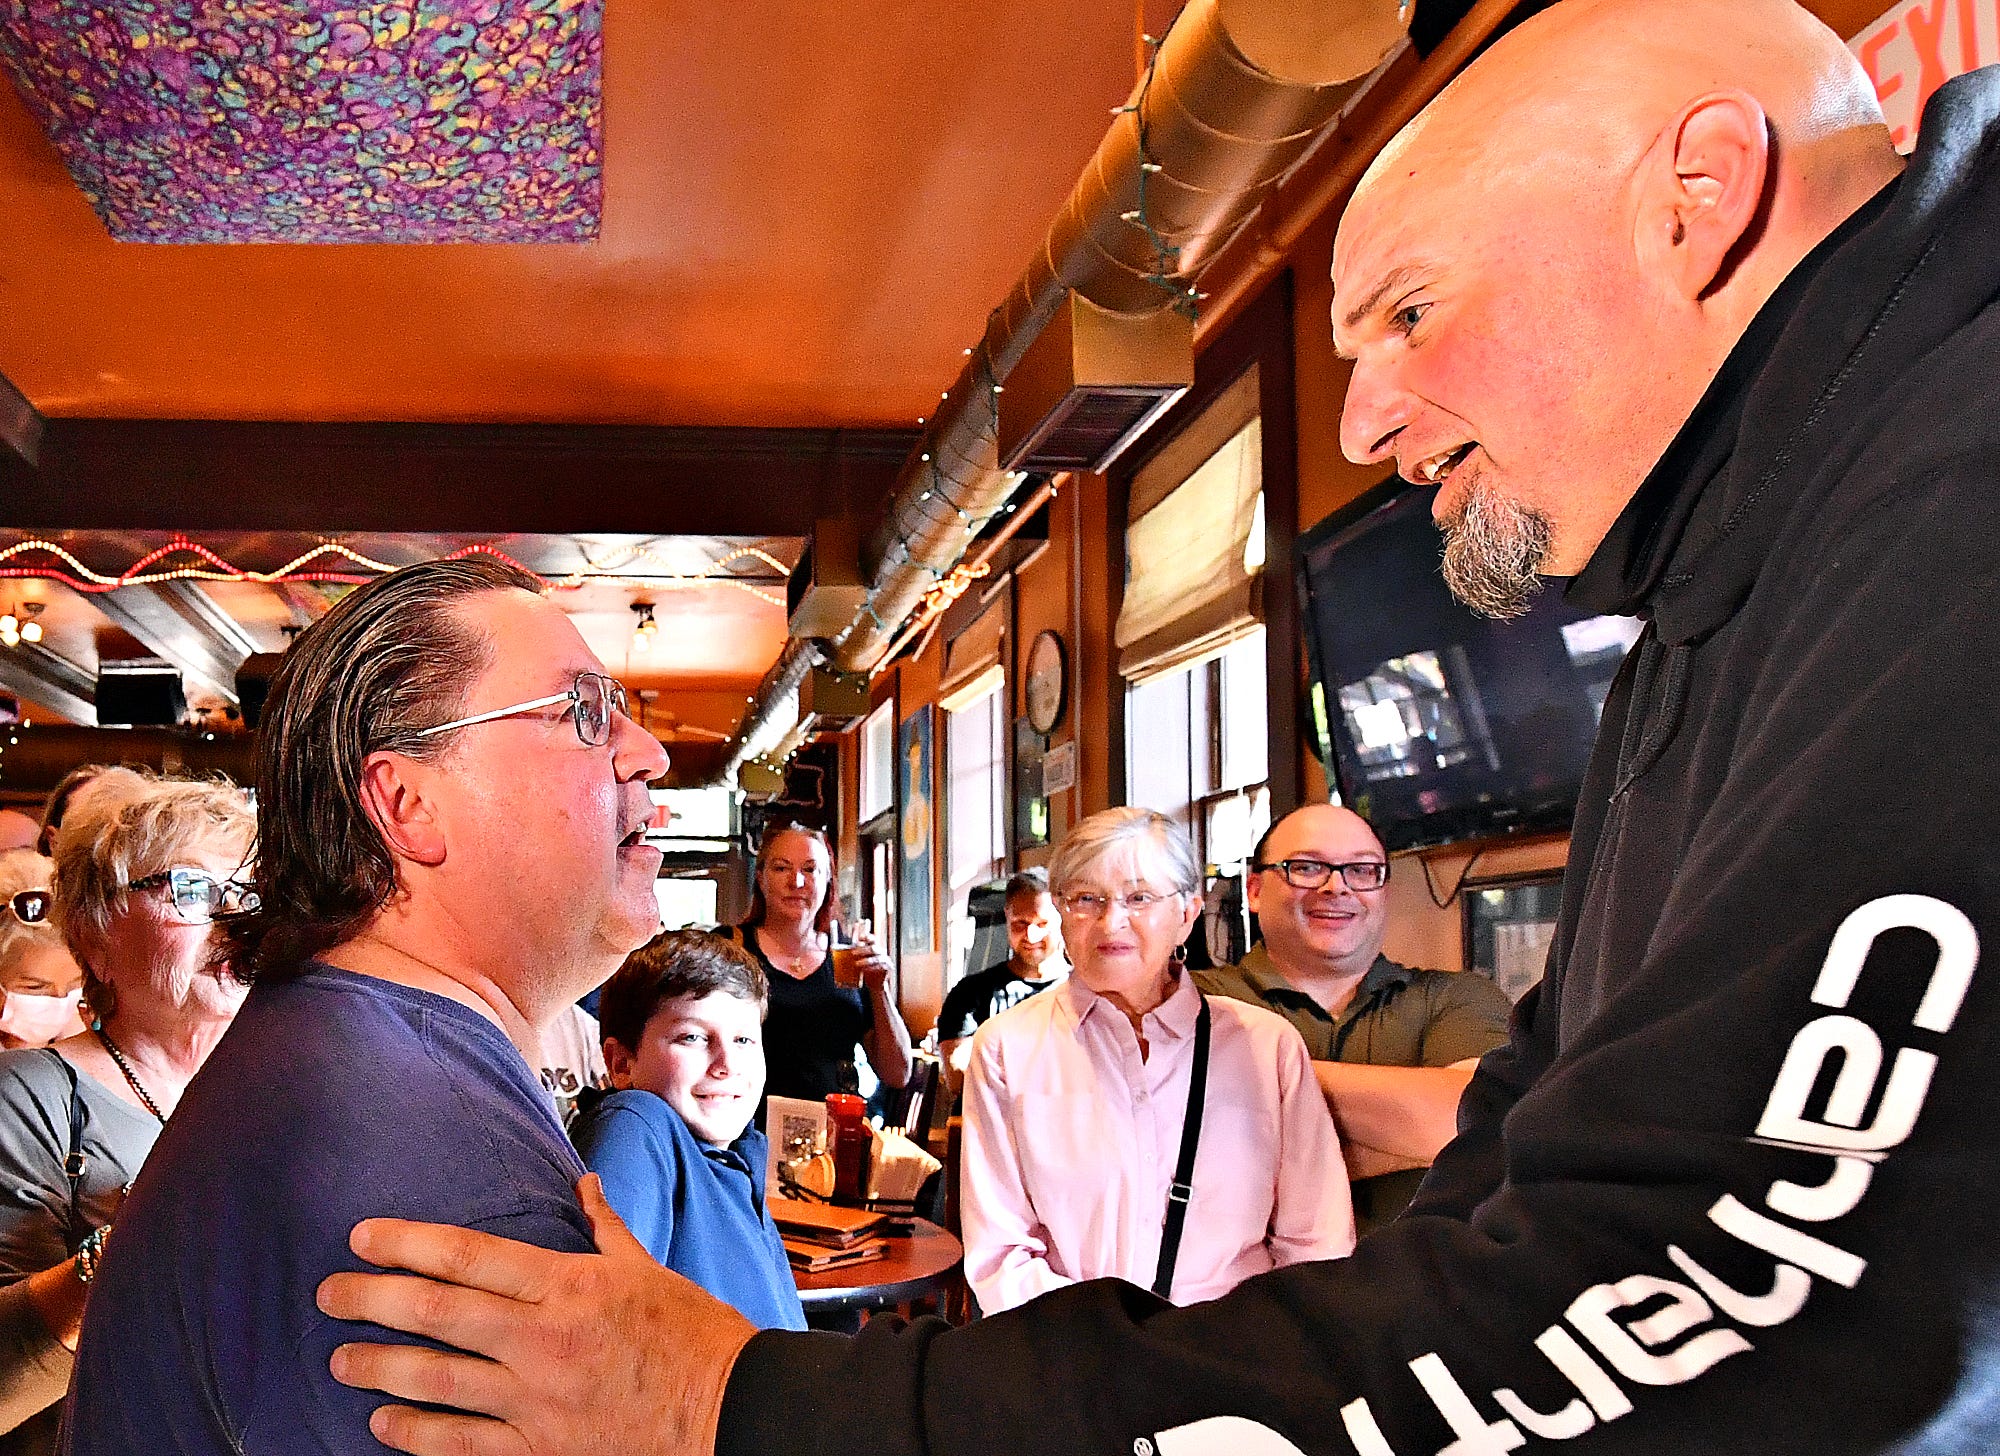 Fred Wallick, left, of Dover Township, greets Lt. Gov. John Fetterman during a campaign stop at Holy Hound Taproom in York City, Thursday, May 12, 2022. Fetterman is a candidate for U.S. Senate. Dawn J. Sagert photo